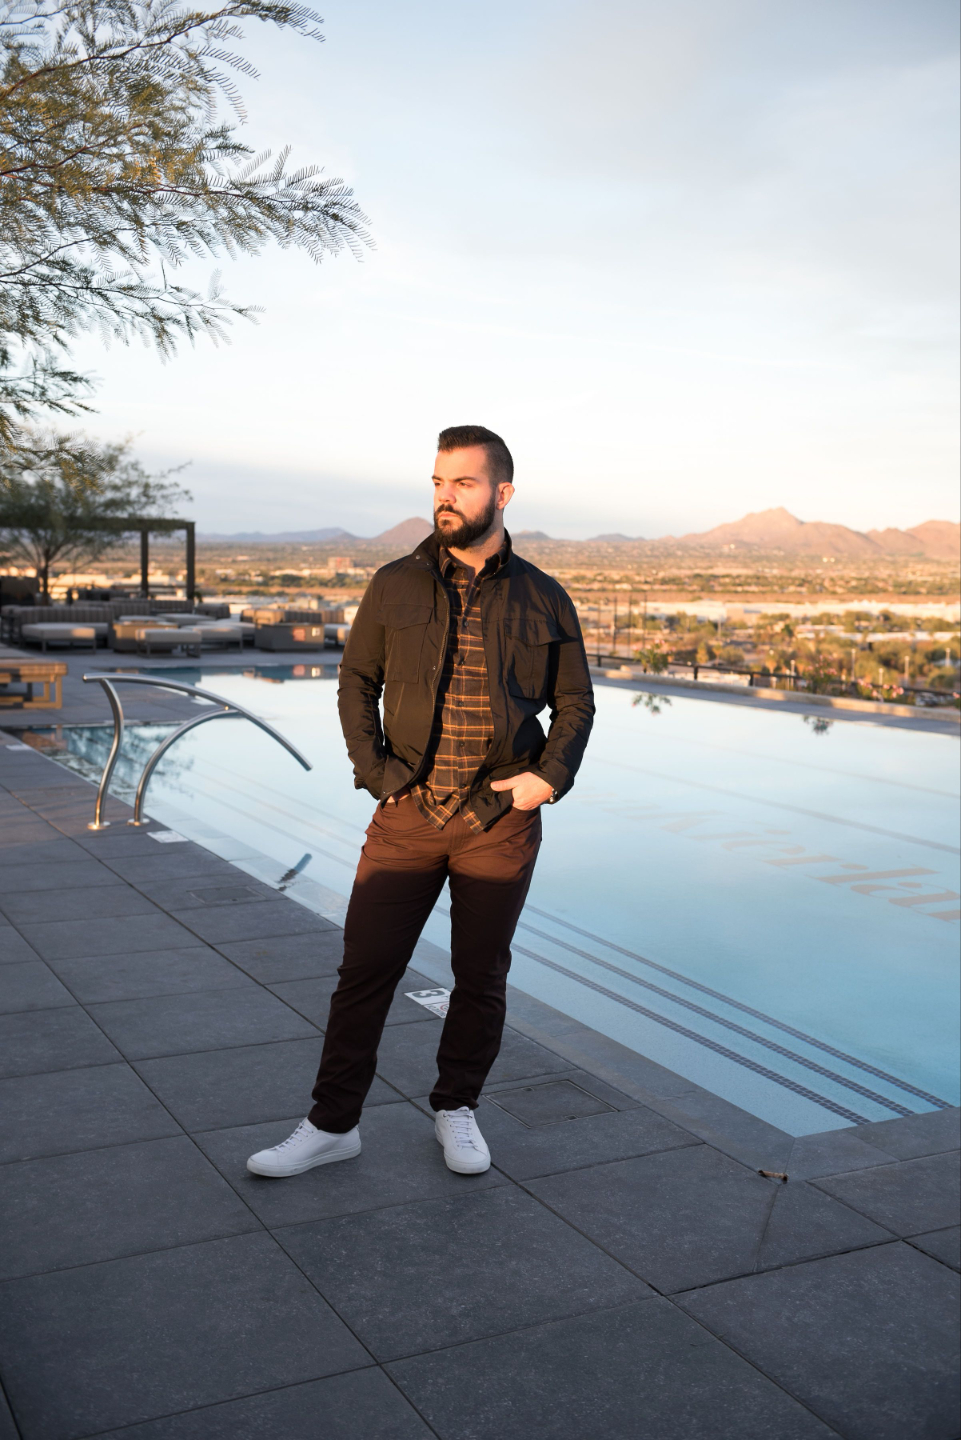 A fashionable man stands in front of pool overlooking city background. His hands are in his pockets. He wears a plaid shirt, brown pants, and white tennis shoes.